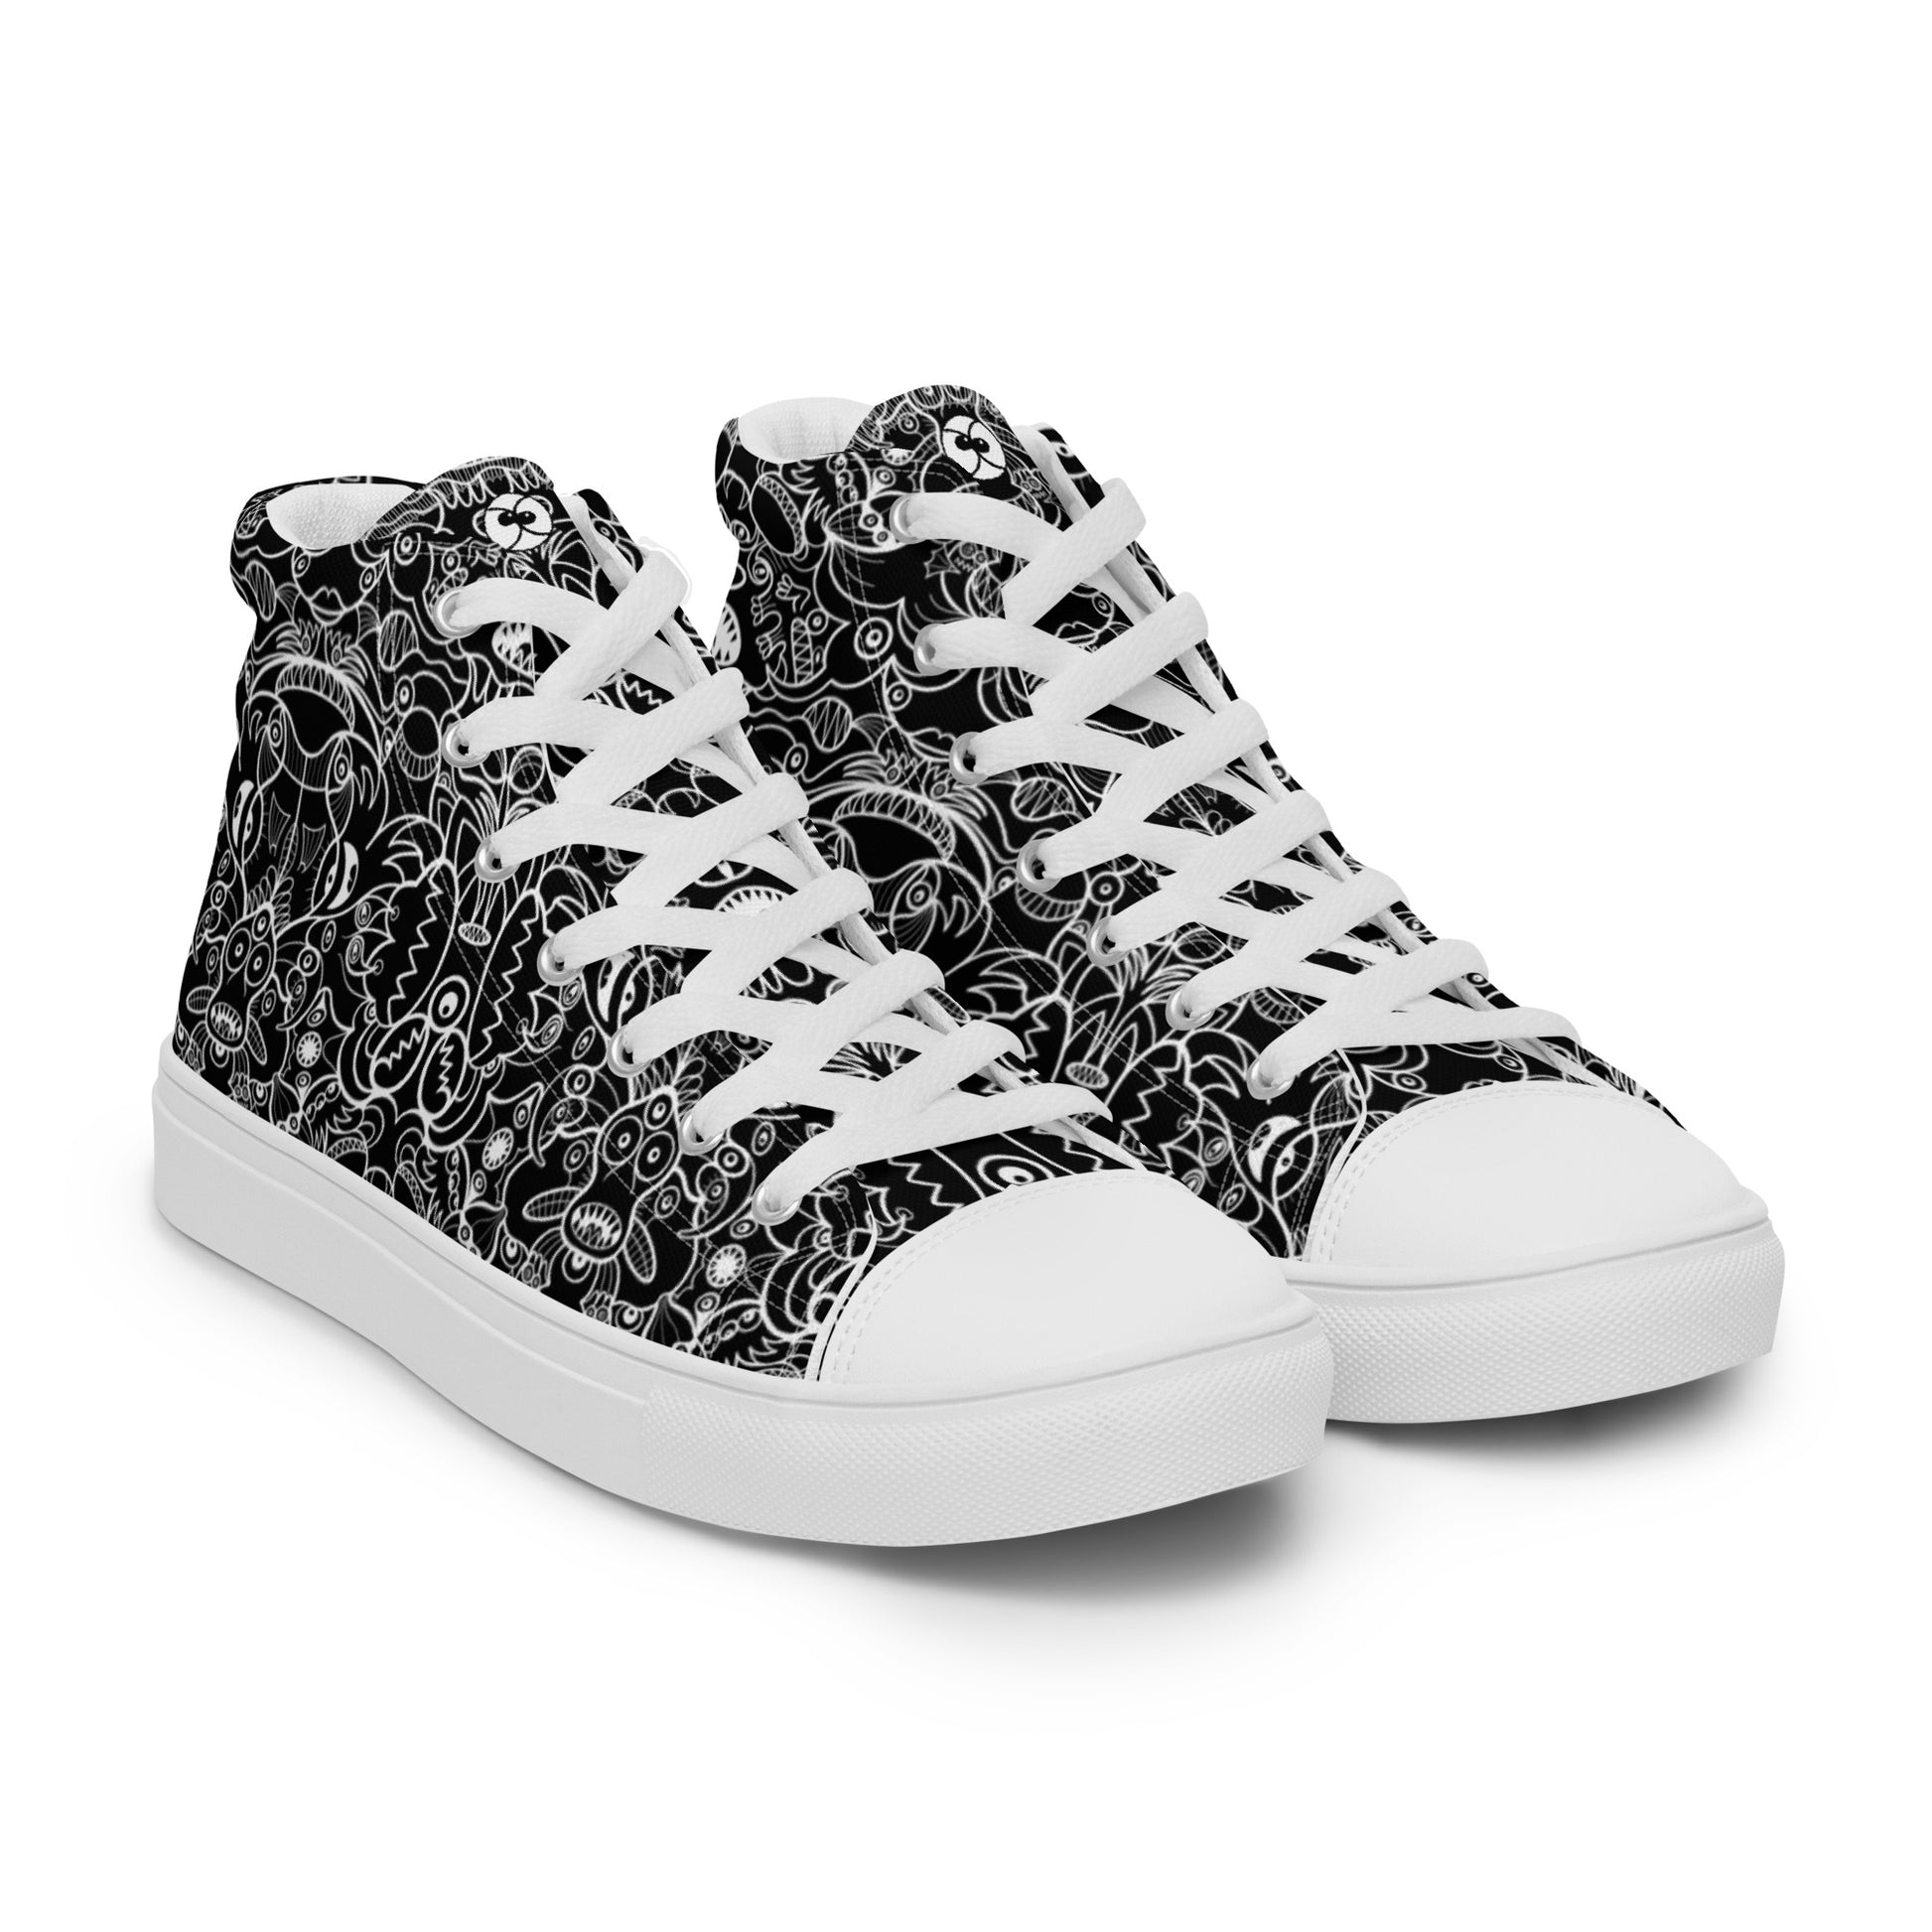 The powerful dark side of the Doodle world Women’s high top canvas shoes. Overview